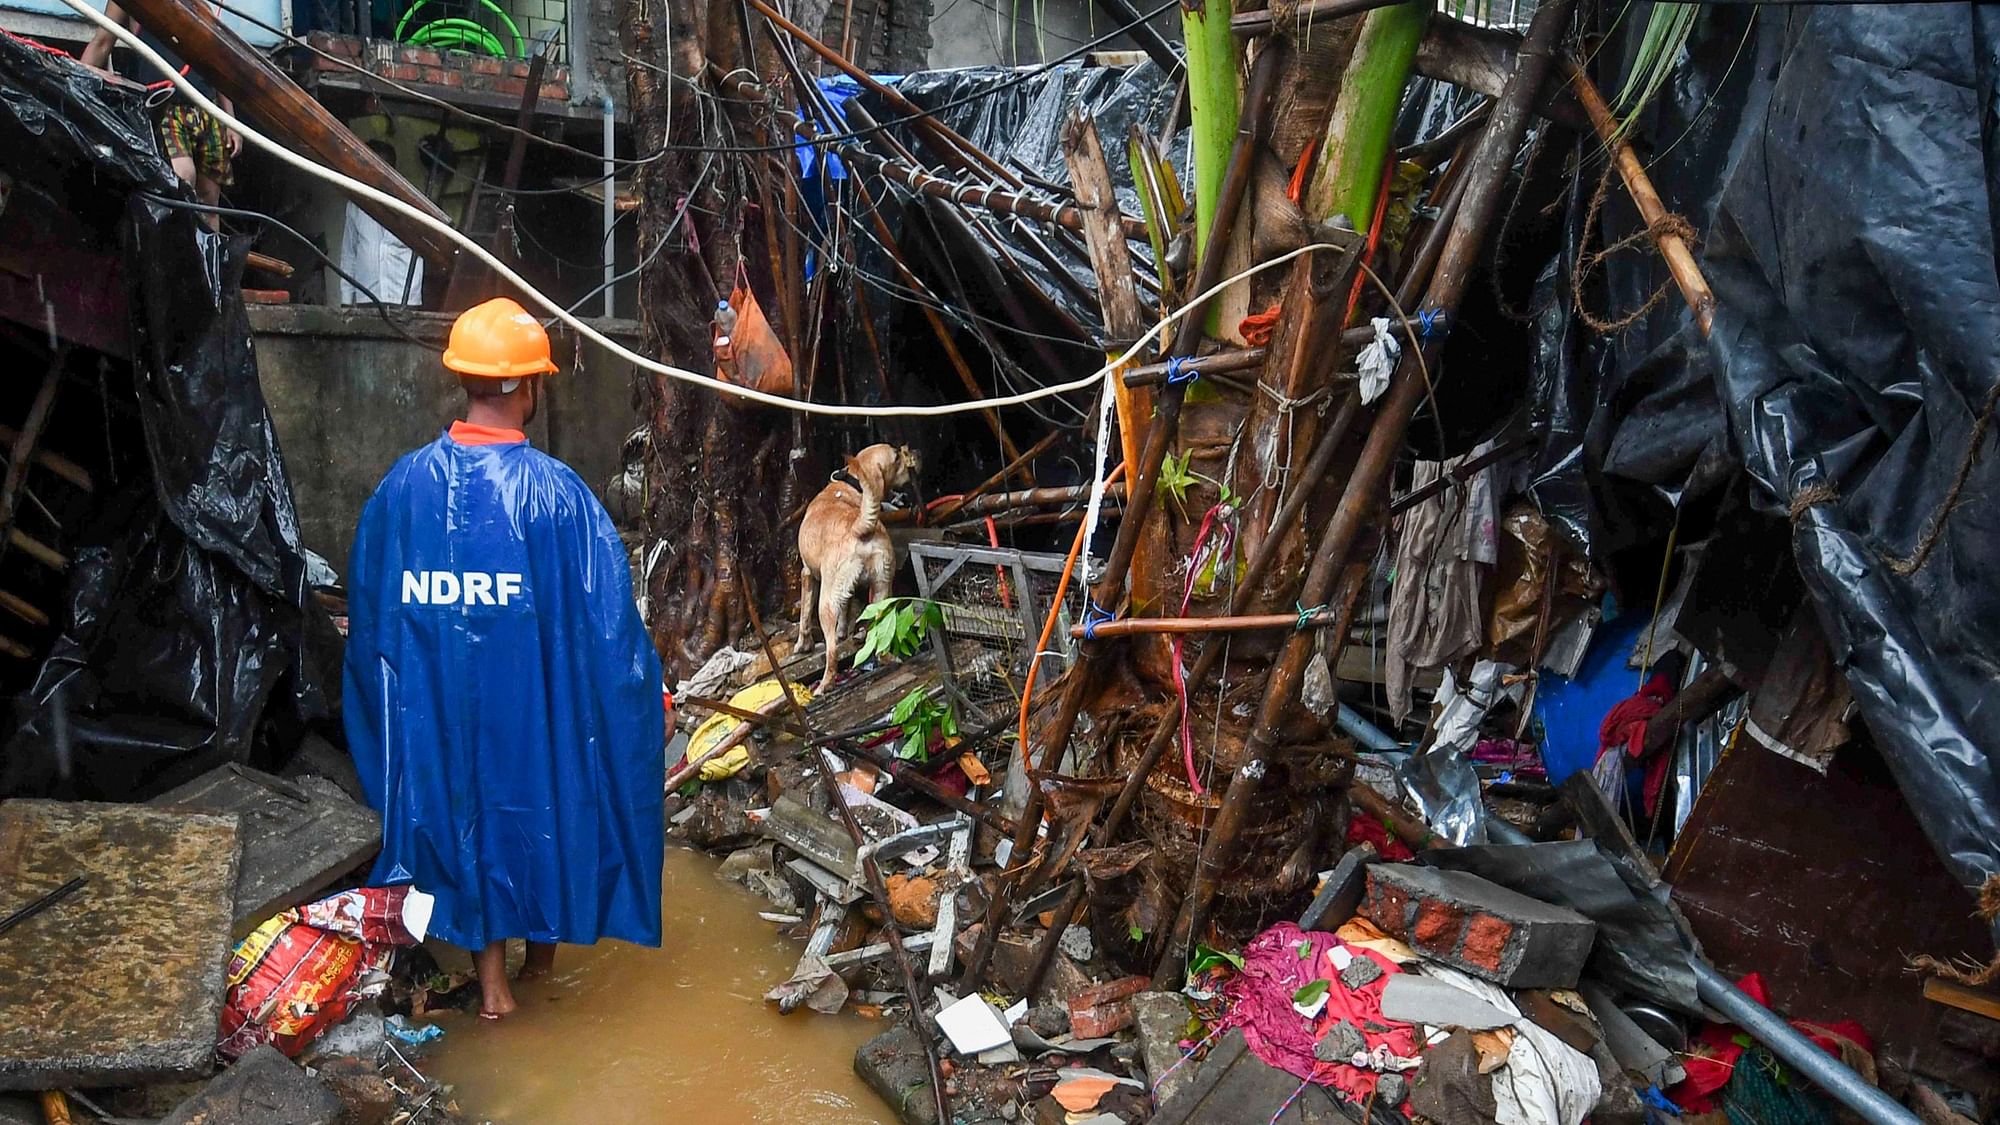 A member of the rescue team with a sniffer dog searches for people trapped under the debris of a wall that collapsed during heavy rain in Malad East, Mumbai.